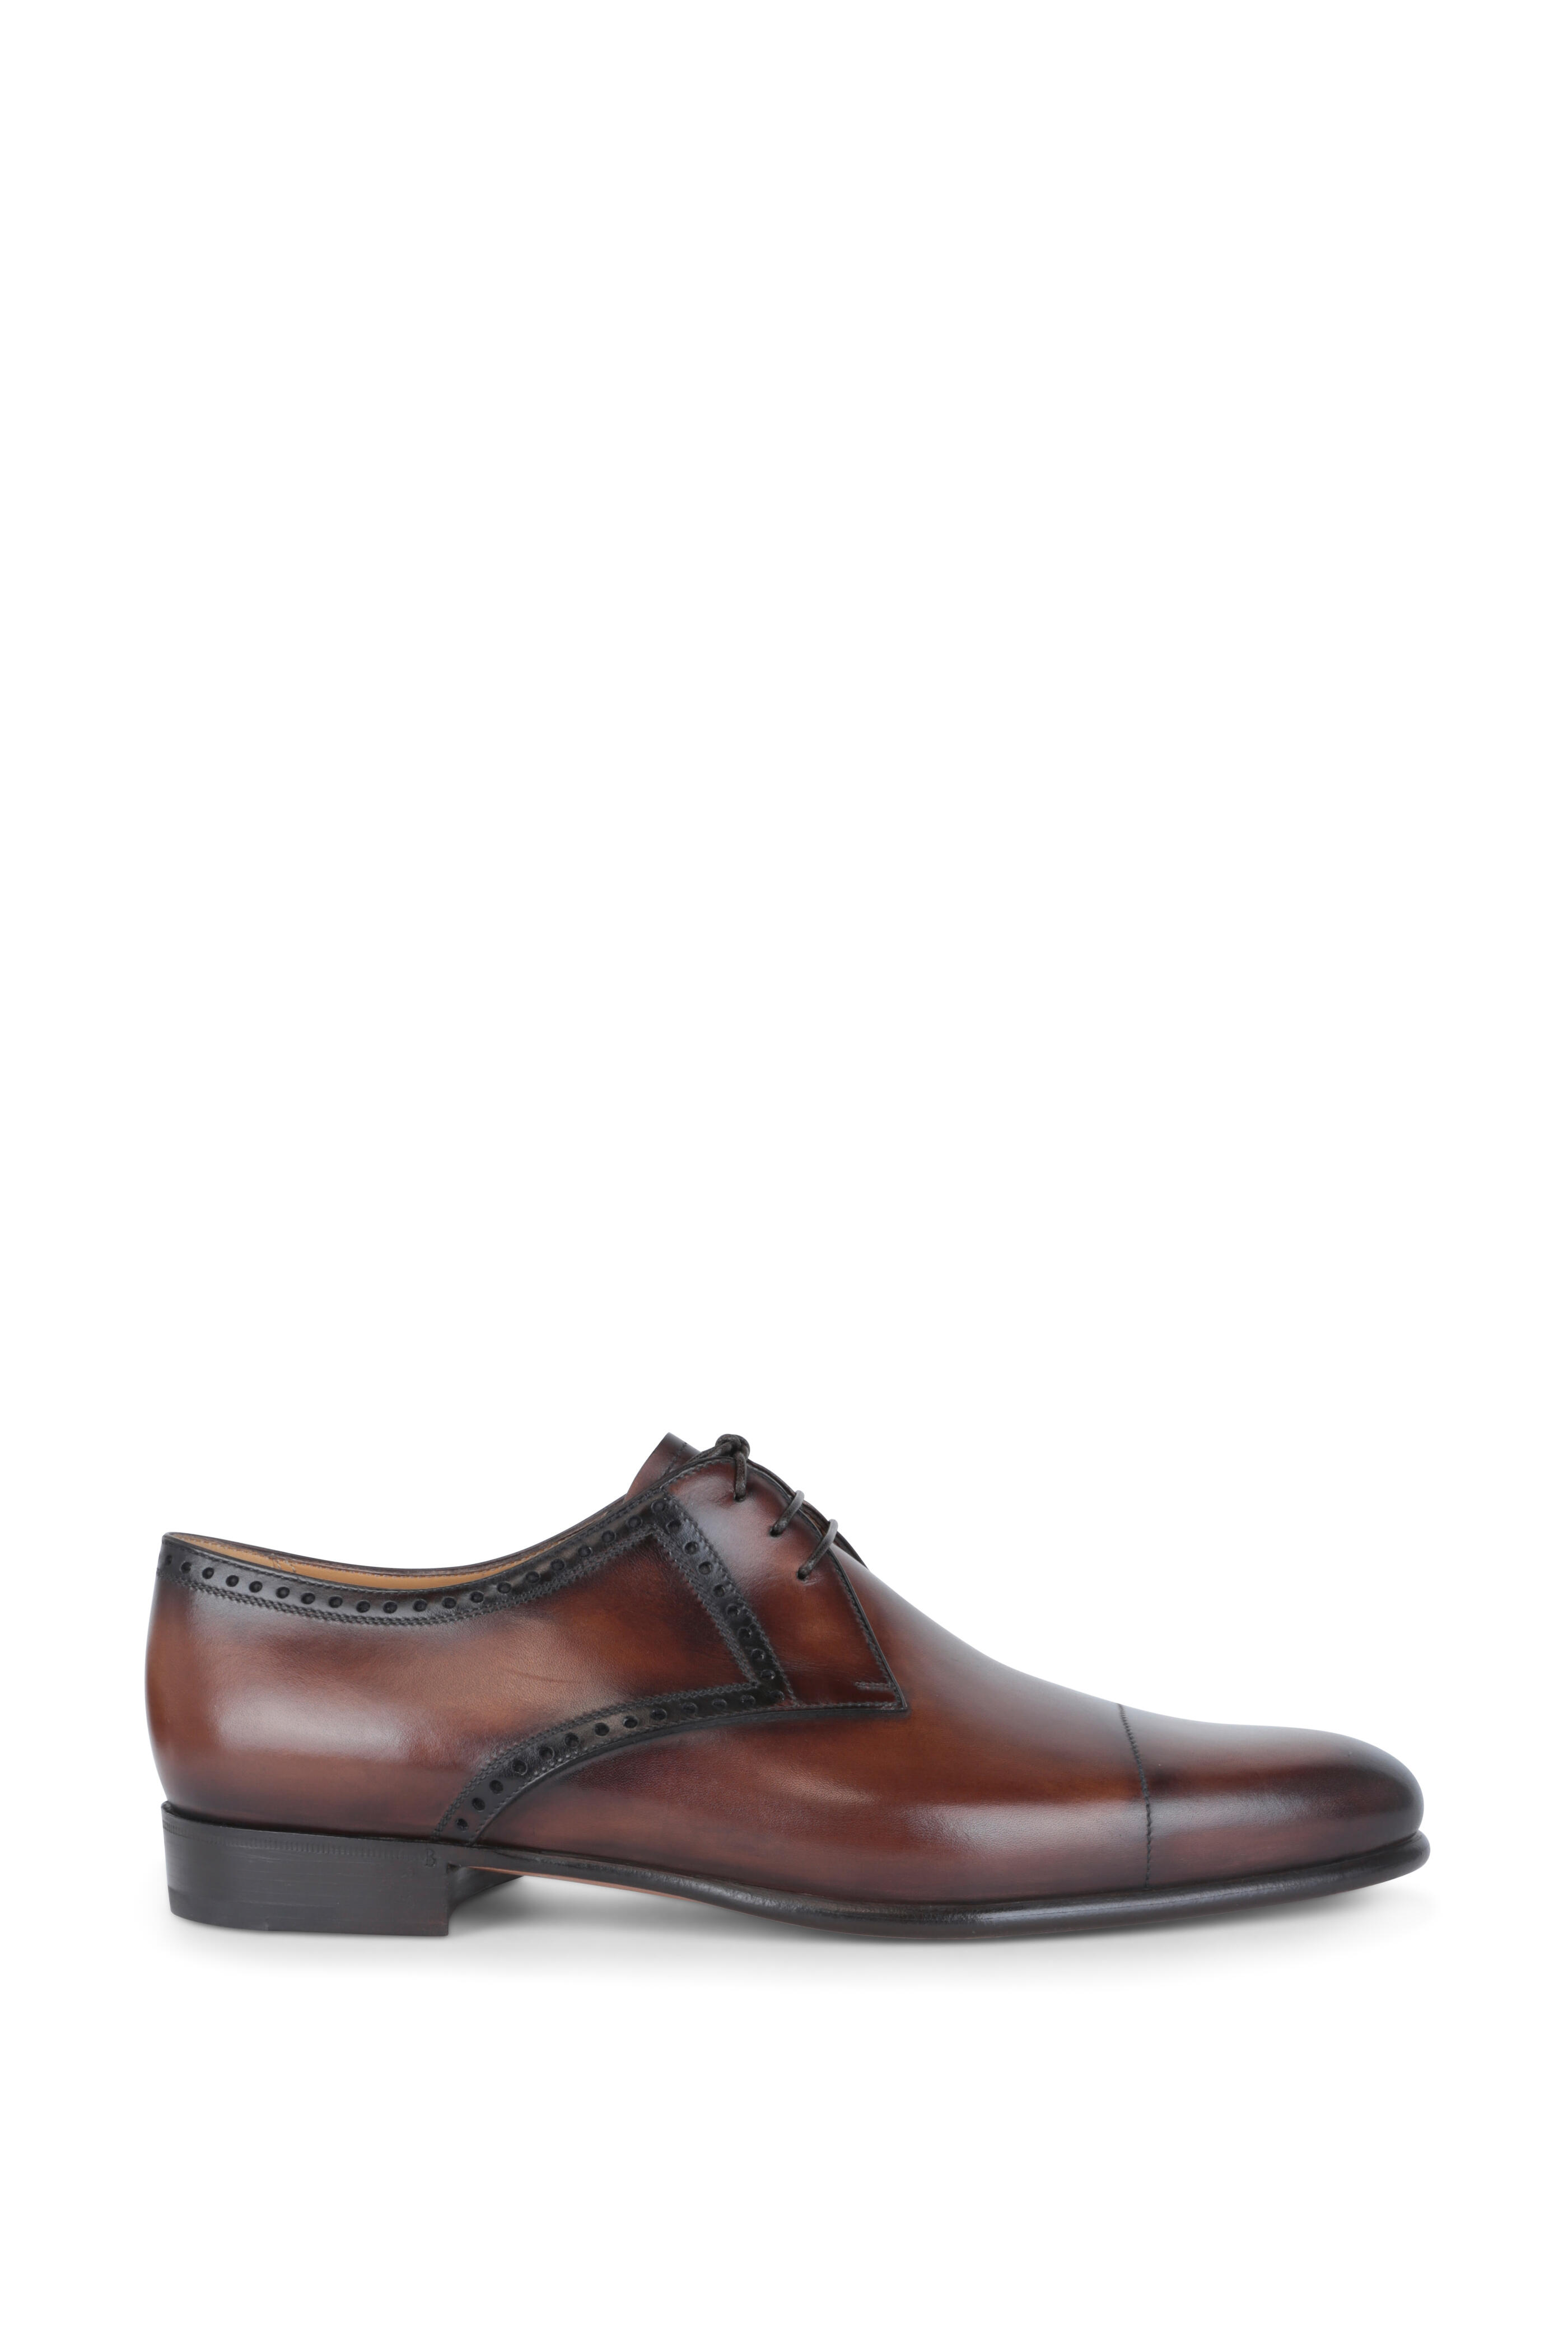 Berluti - Ponctuation Galet Brun Leather Derby | Mitchell Stores